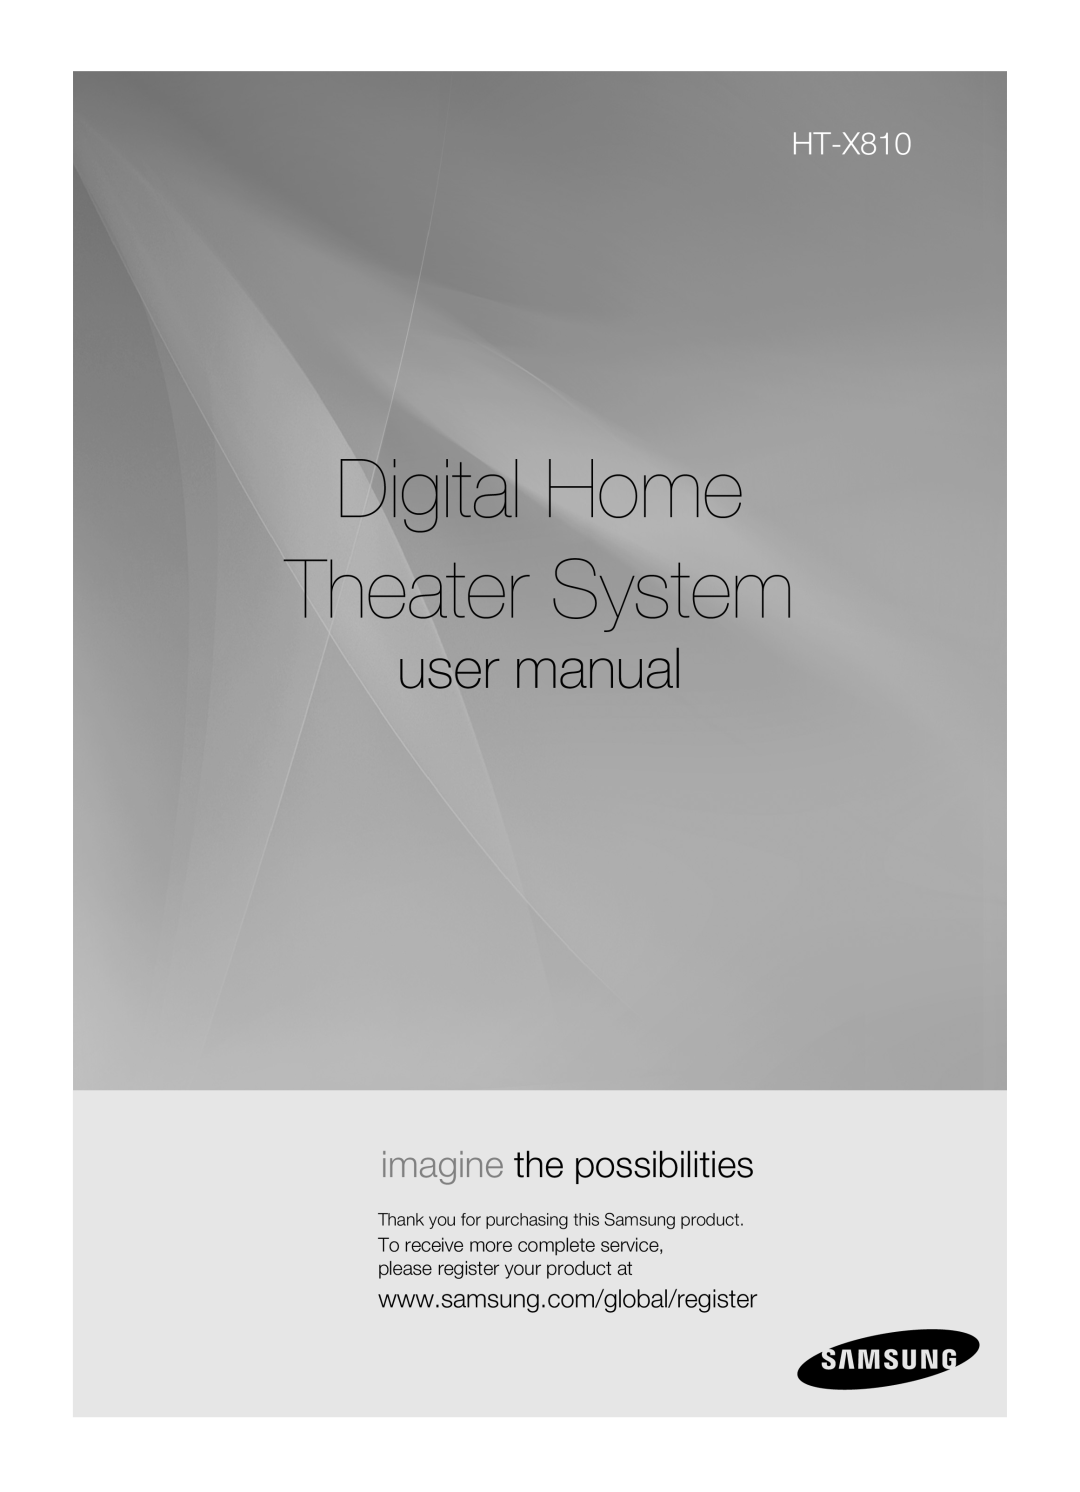 Sony HT-X810 user manual Digital Home Theater System, imagine the possibilities 